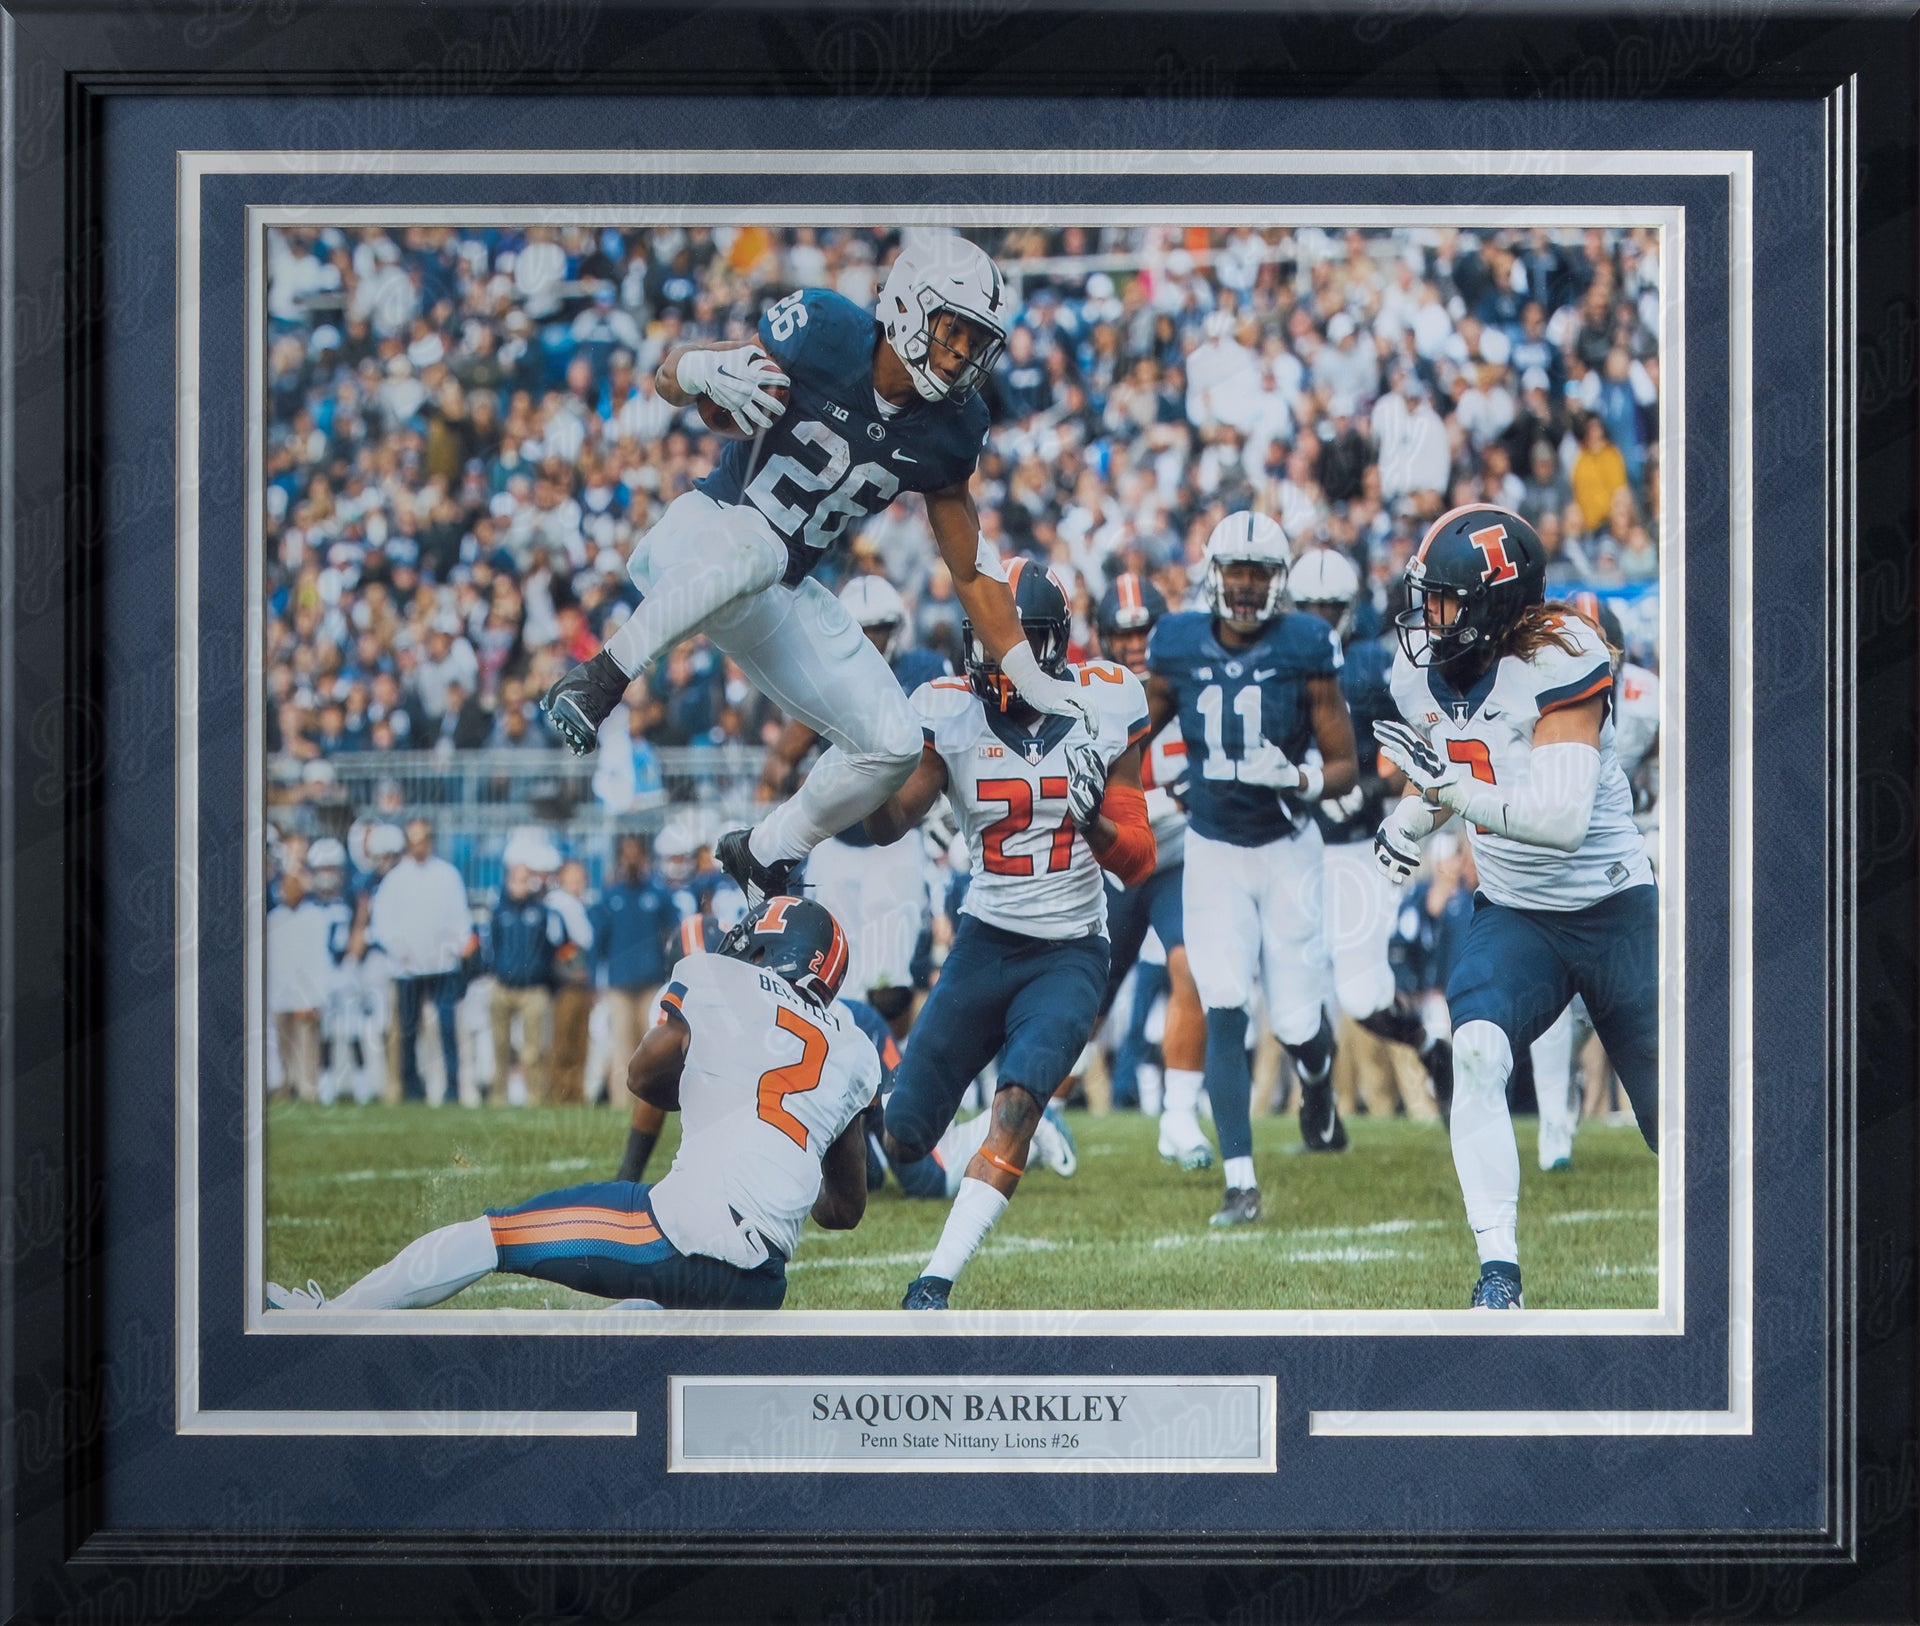 Saquon Barkley Penn State Nittany Lions College Football Framed & Matted Photo - Dynasty Sports & Framing 